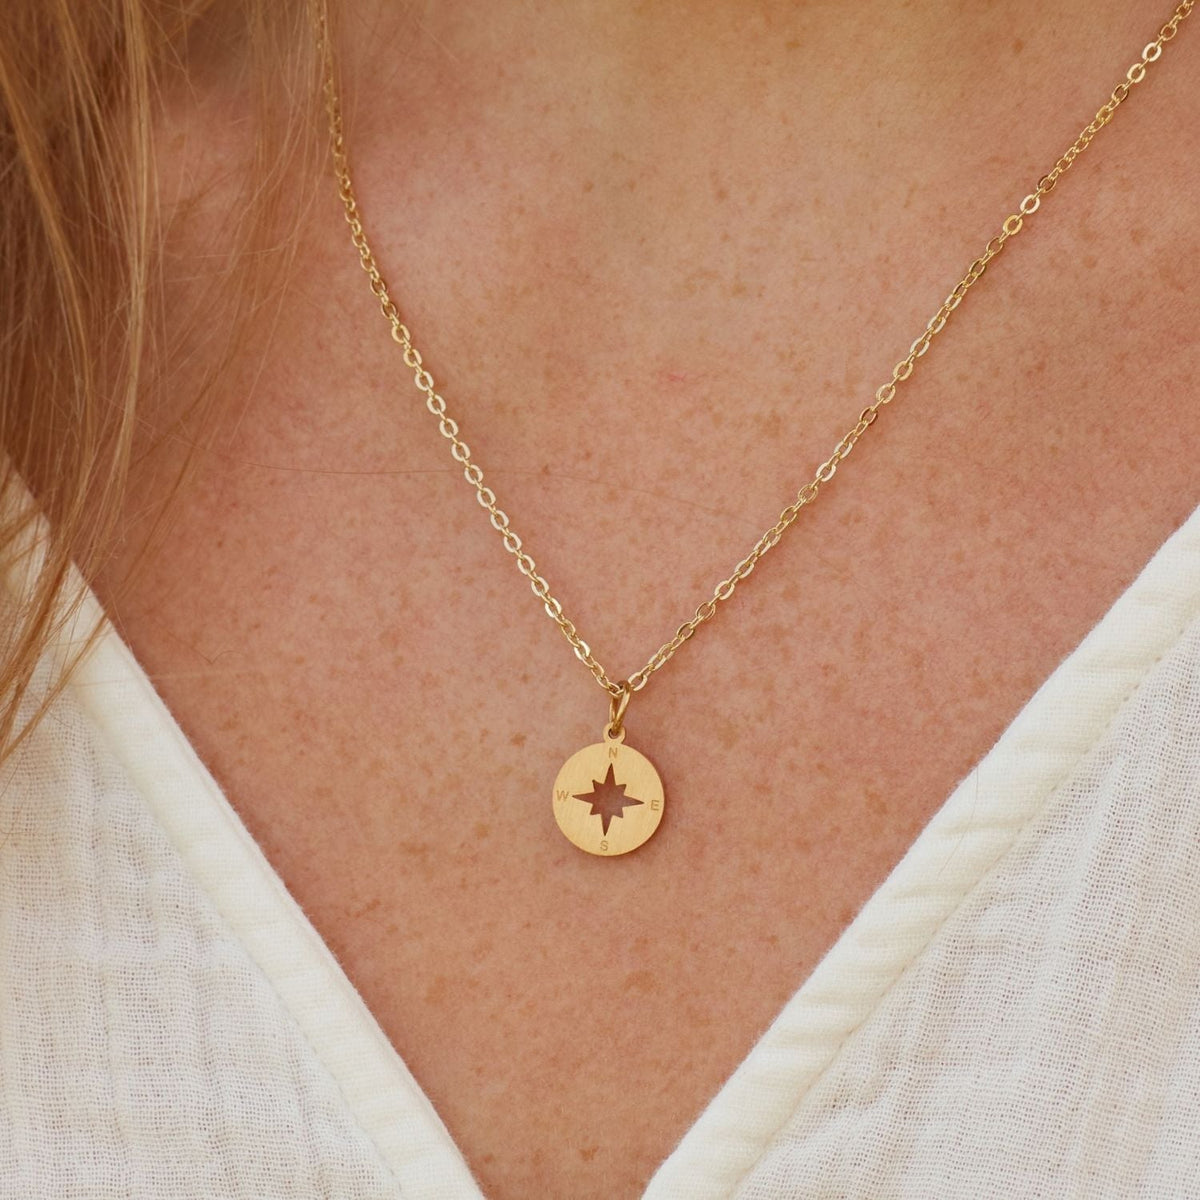 To the Mother of My Groom (From Bride) | First Breath | Compass Necklace